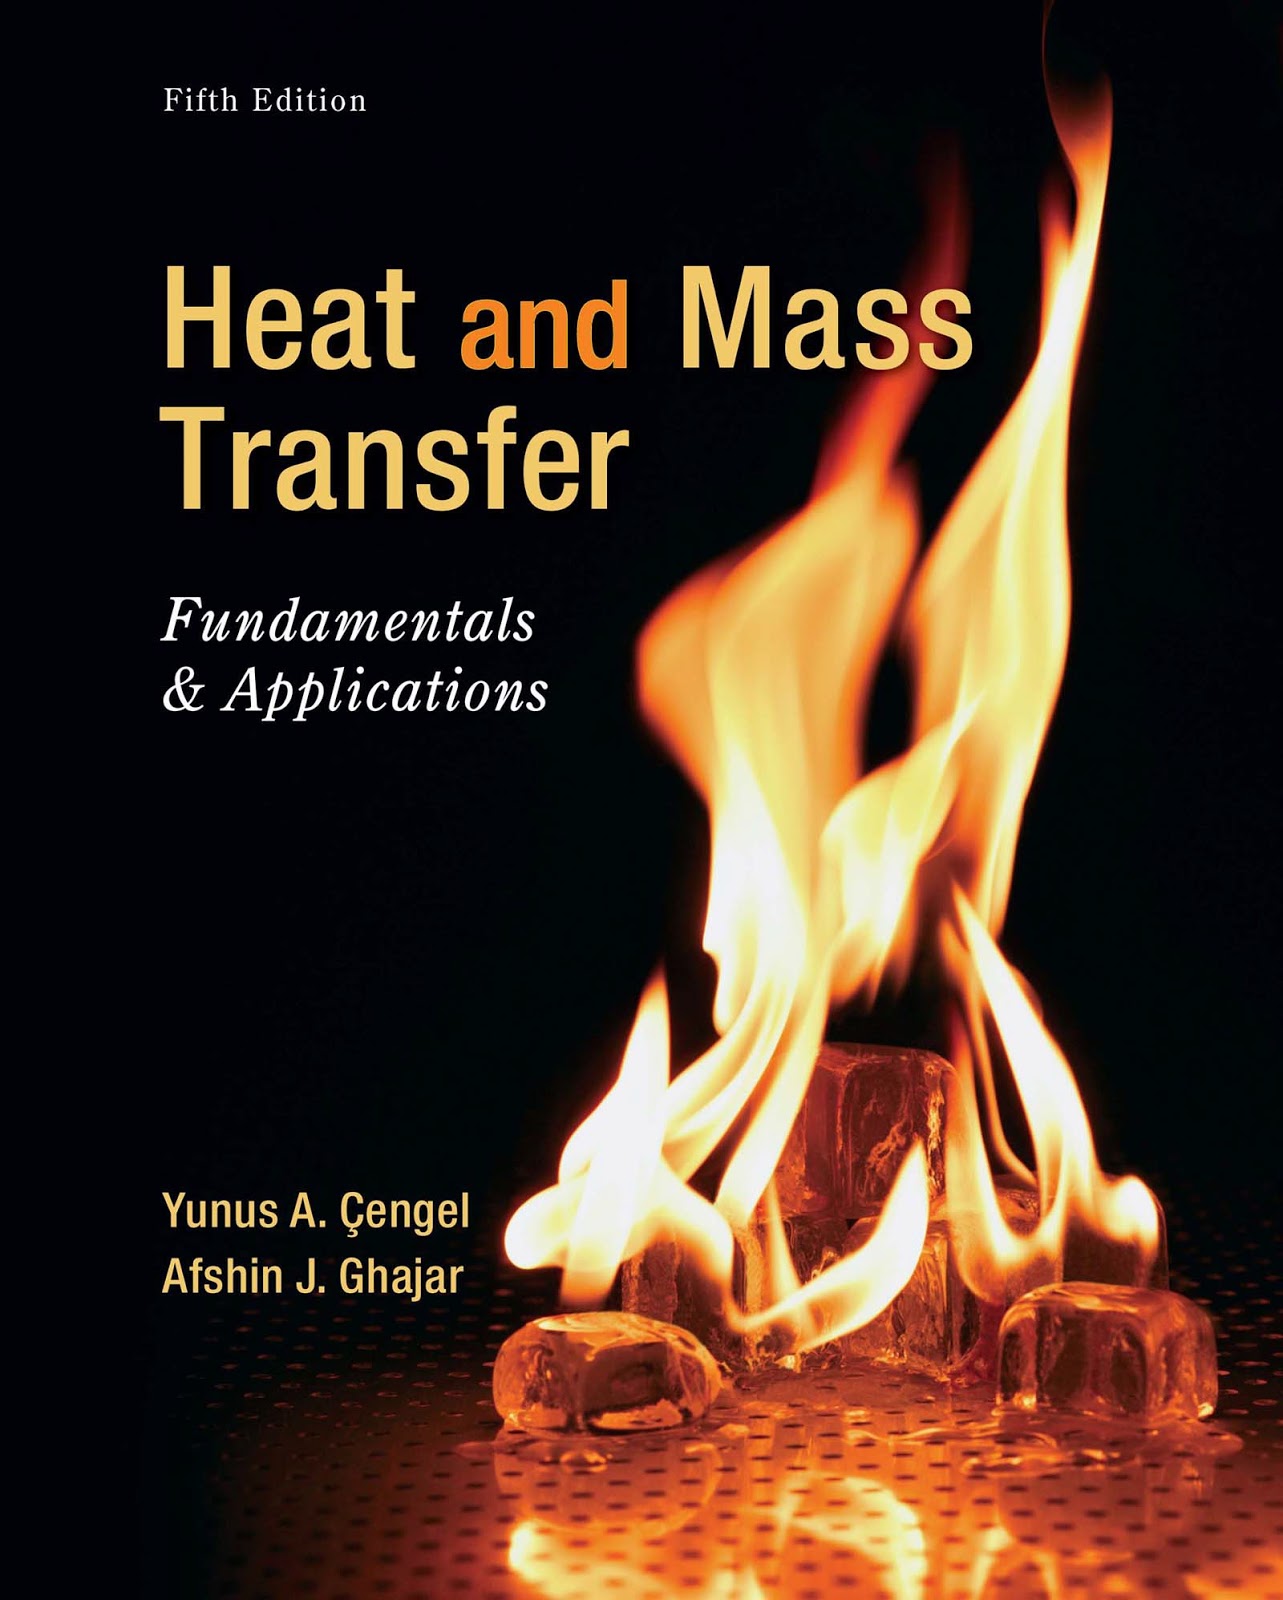 phd thesis heat and mass transfer